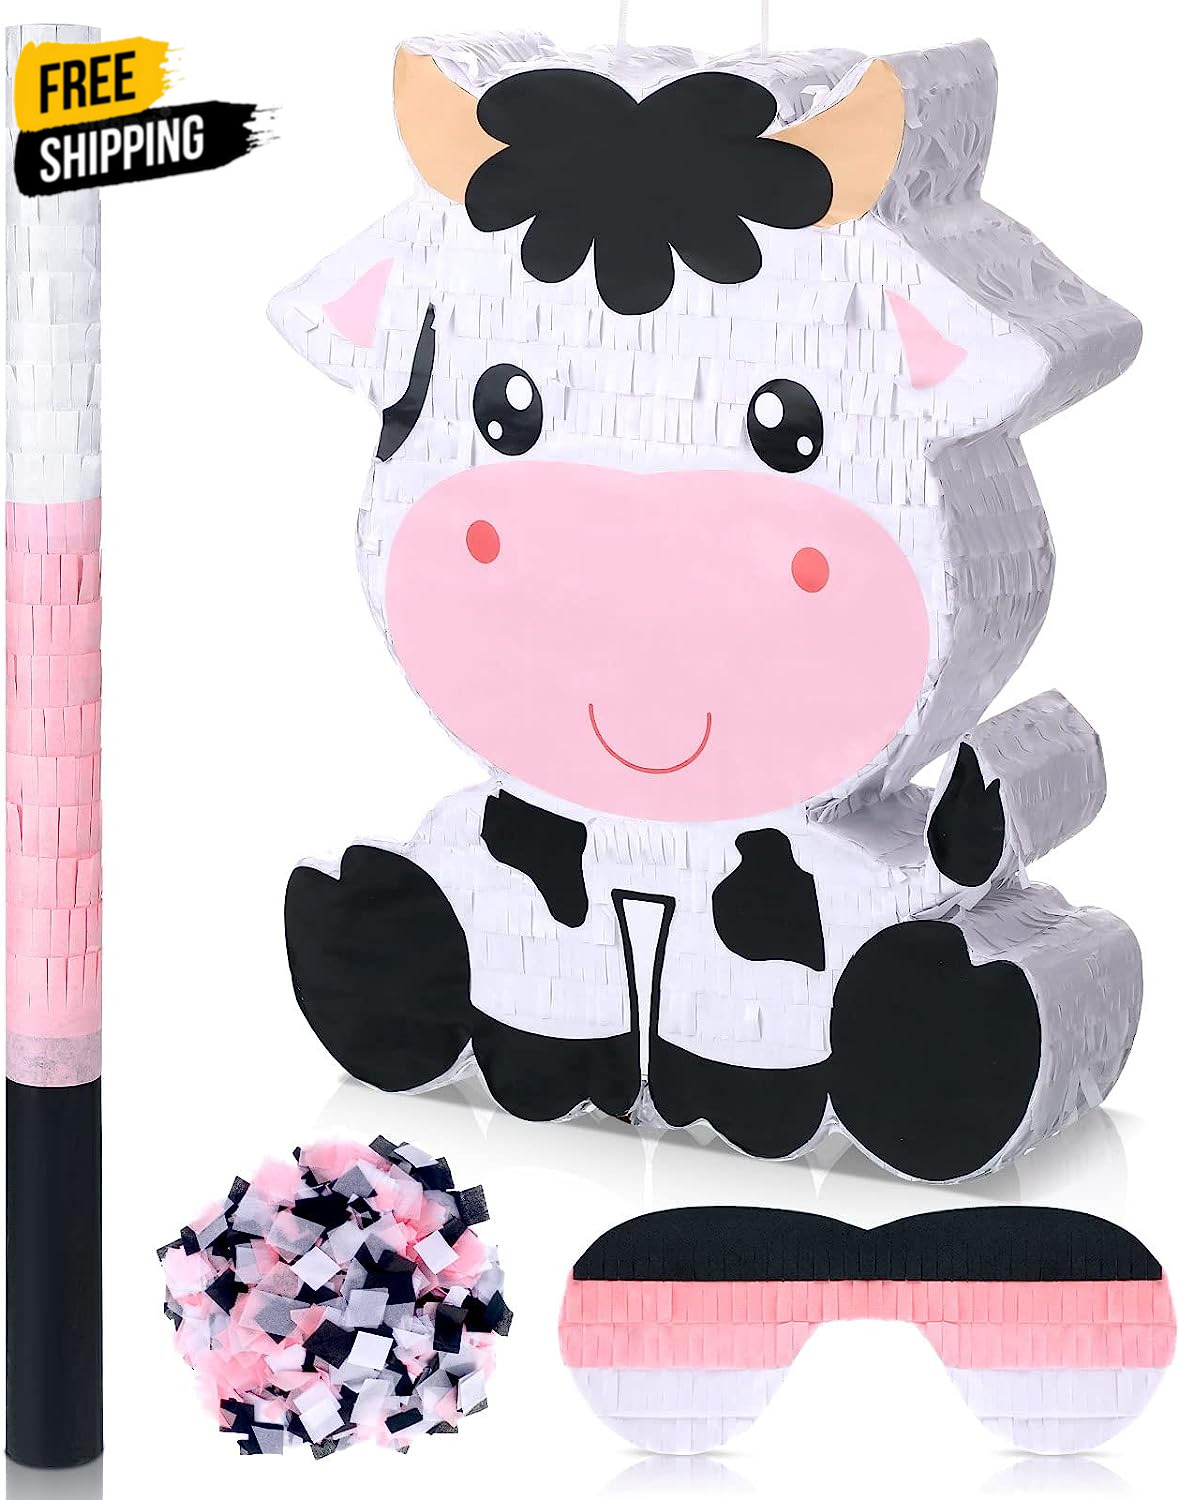 Cow Pinata Birthday Party Decorations Farm Animal Themed Birthday Party Supplies